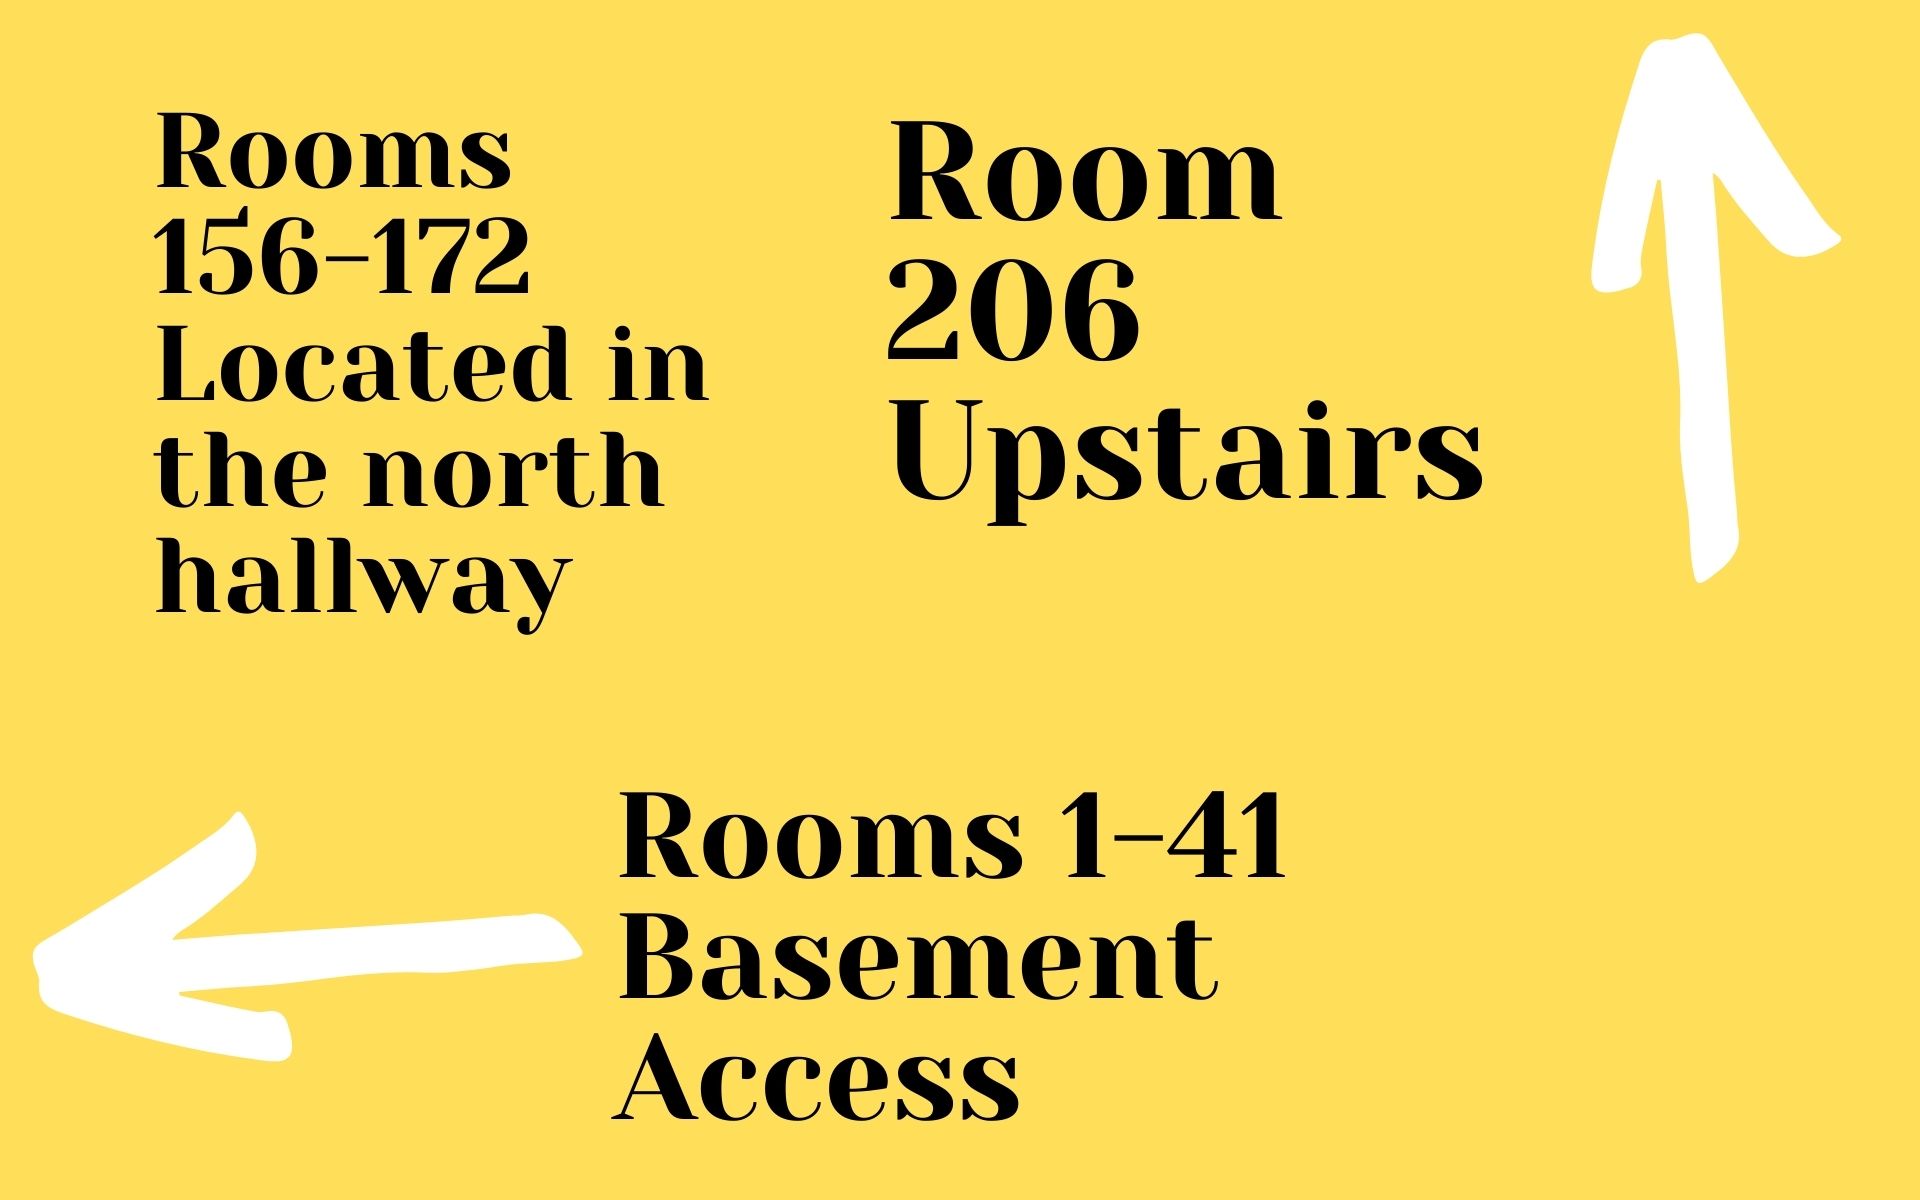 Rooms 156-172 Located in the north hallway. Room 206 Upstairs. Rooms 1-41 Basement Access